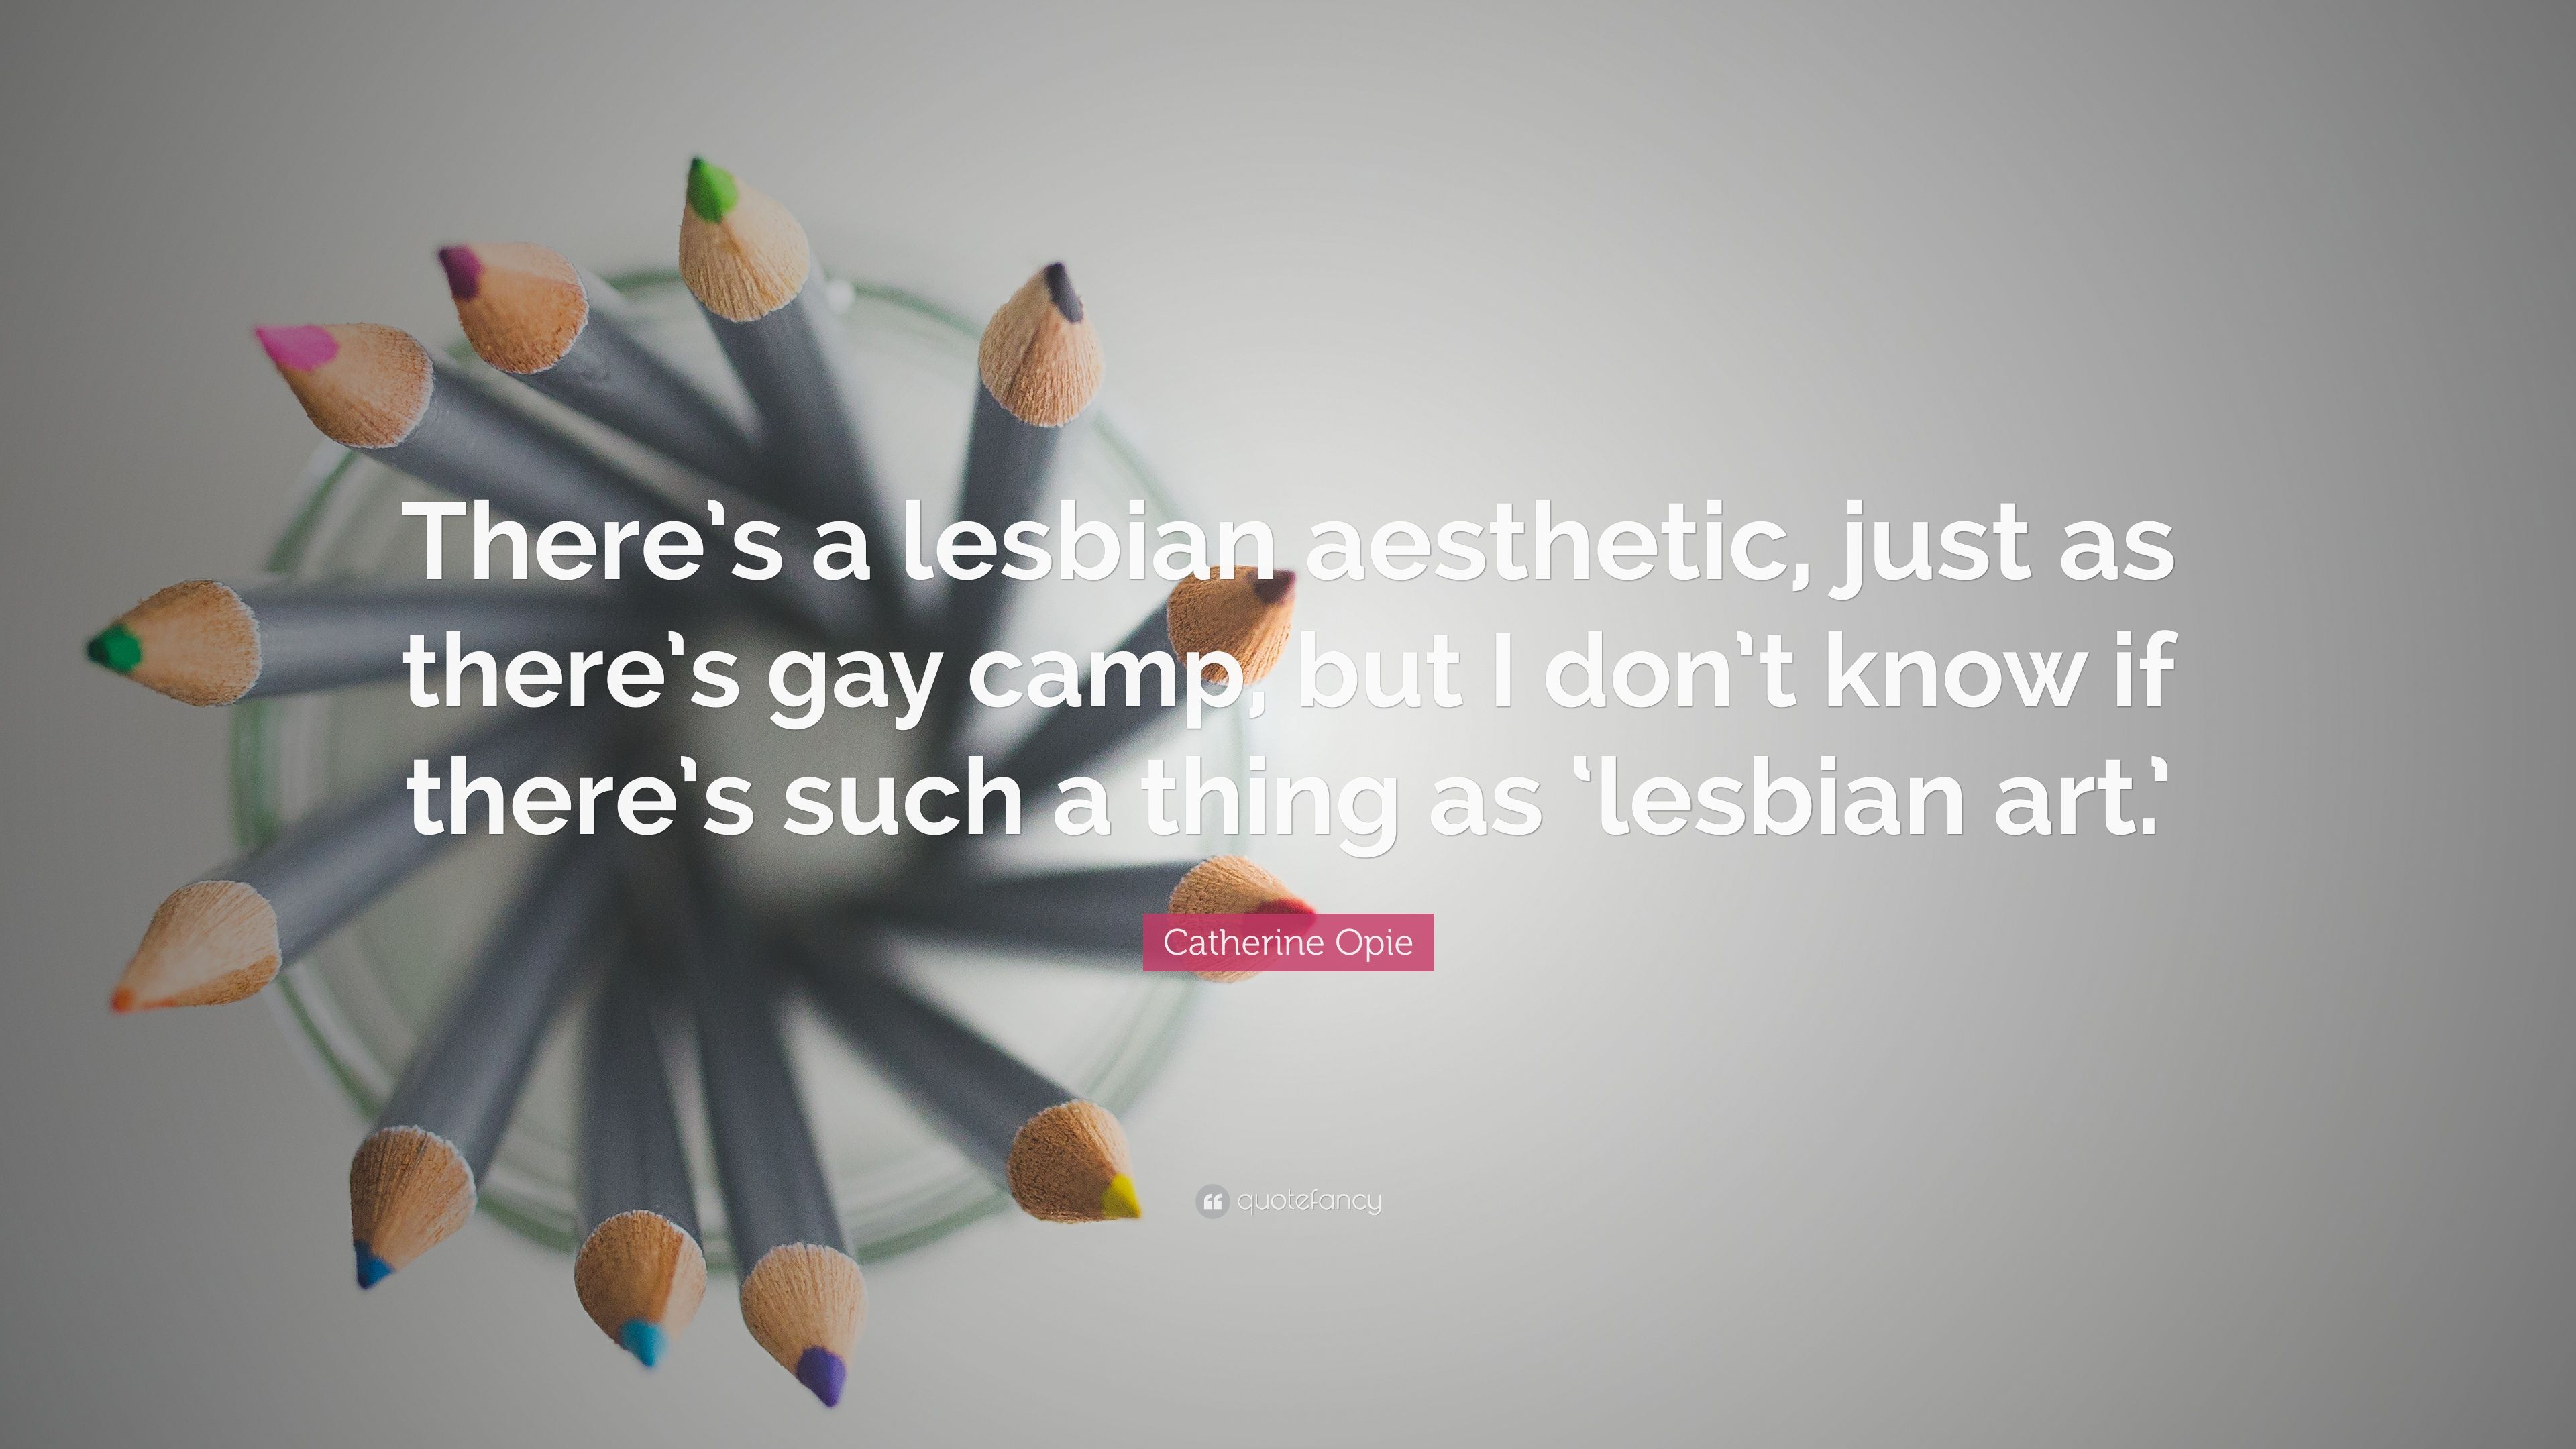 Catherine Opie Quote: “There's a lesbian aesthetic, just as there's gay camp, but I don't know if there's such a thing as 'lesbian art.'” (7 wallpaper)